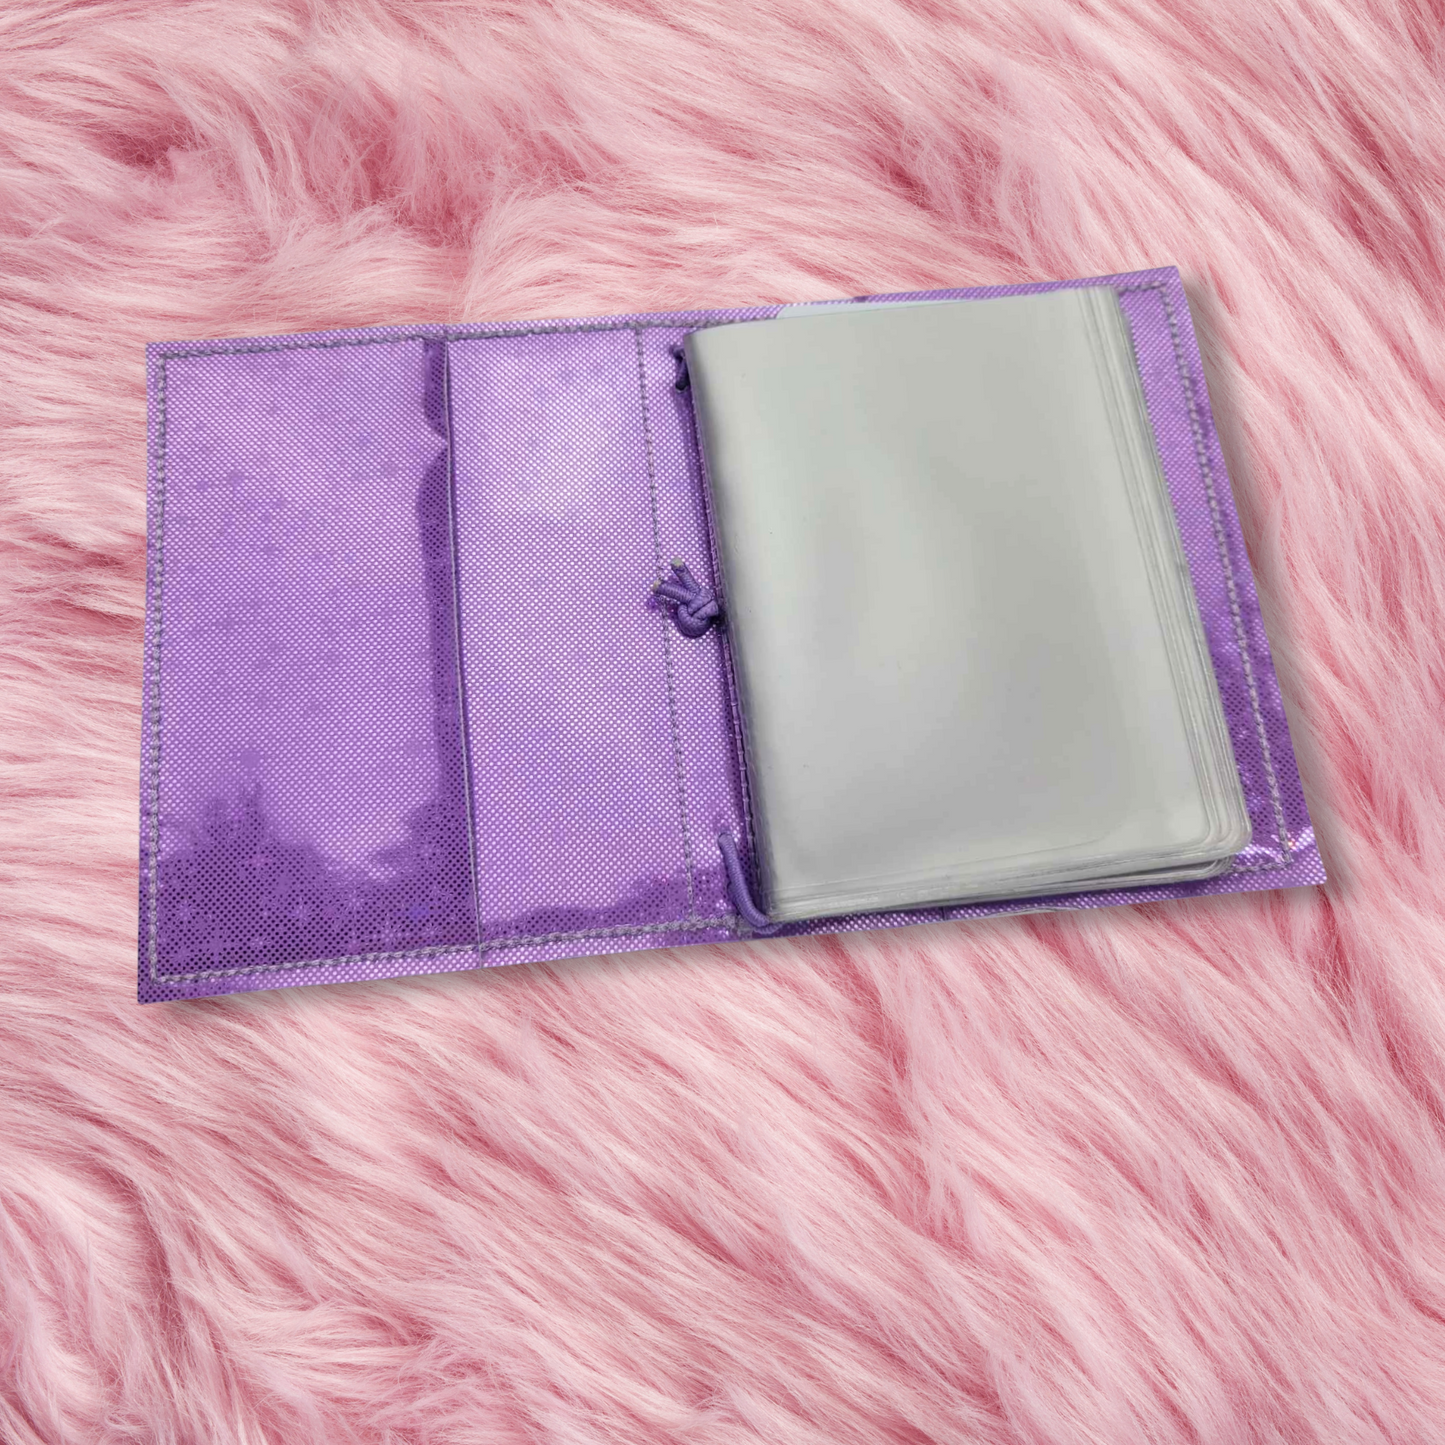 Lilac Sticker/Washi Wallet Handmade with Elastic Closure (Includes cards and 1 sample!!)